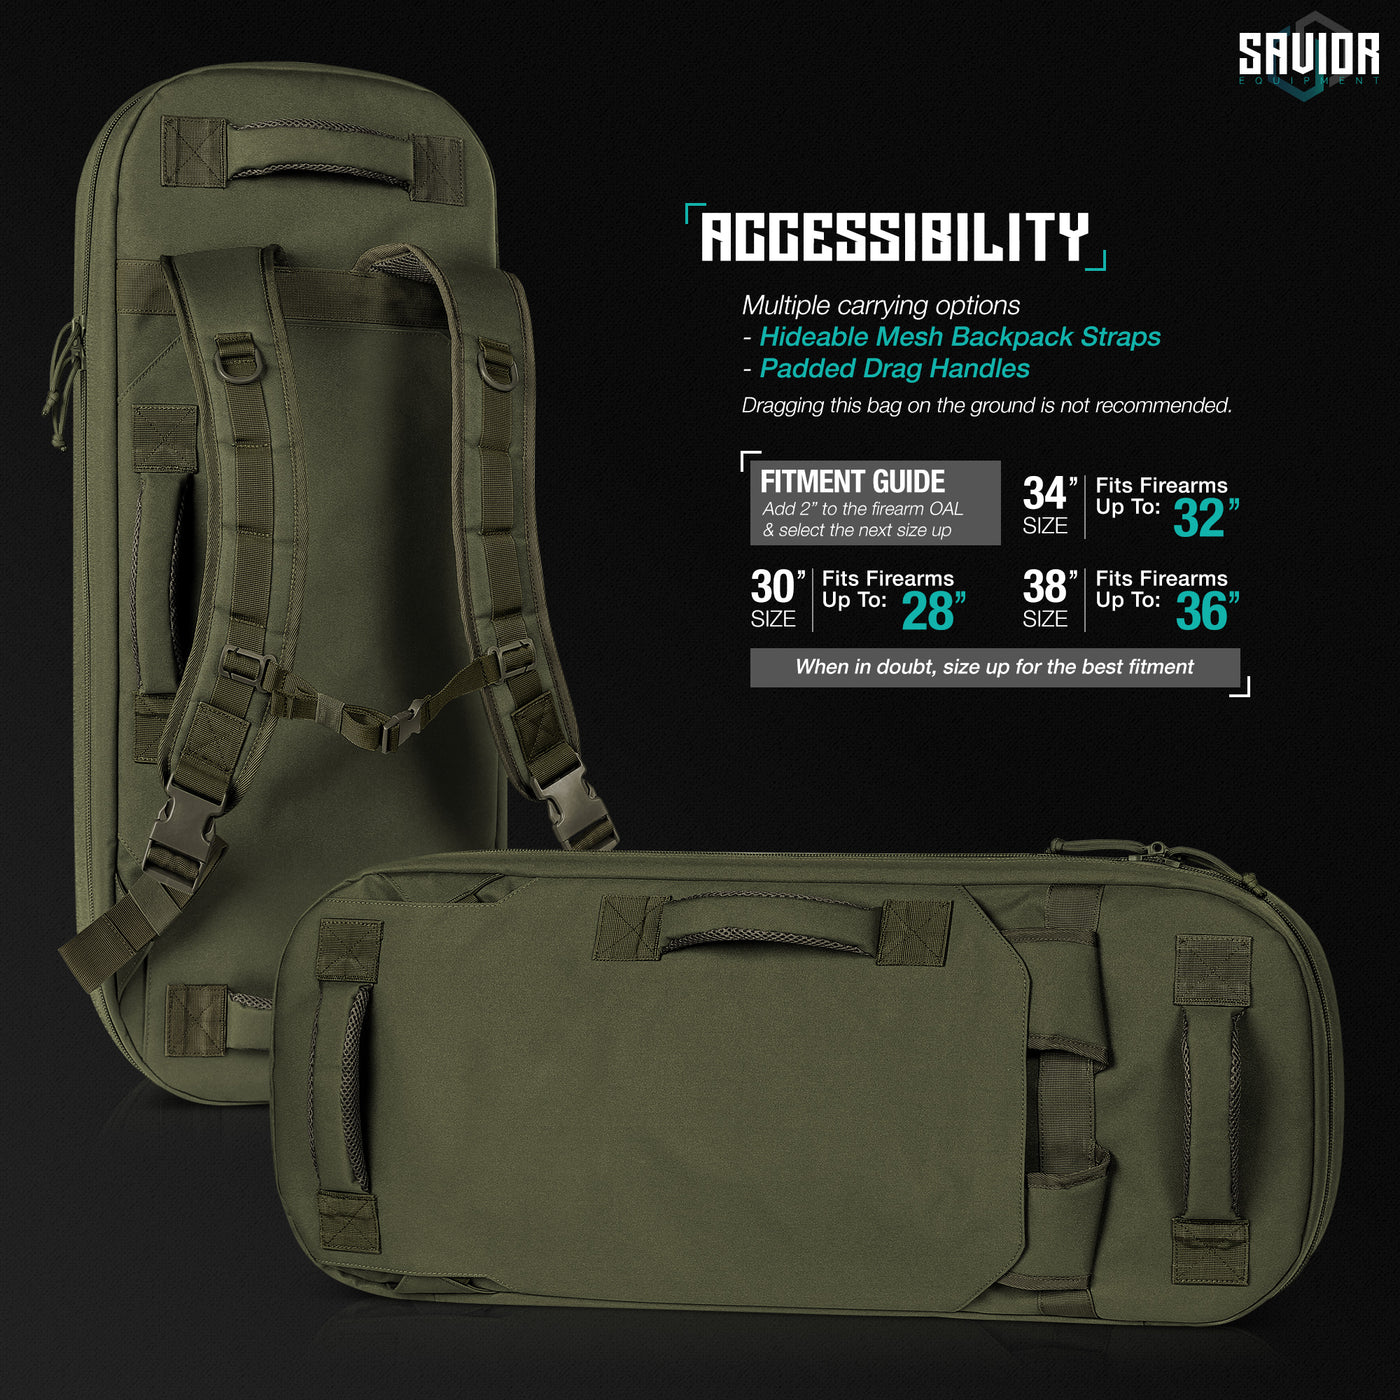 Accessibility - Multiple carrying options. Hideable mesh backpack straps. Padded drag handles. Dragging this bag on the ground is not recommended. Fitment Guide Add 2" to the firearm OAL & select the next size up. 30" fits firearms up to 28". 34" fits firearms up to 32". When in doubt, size up for the best fitment.